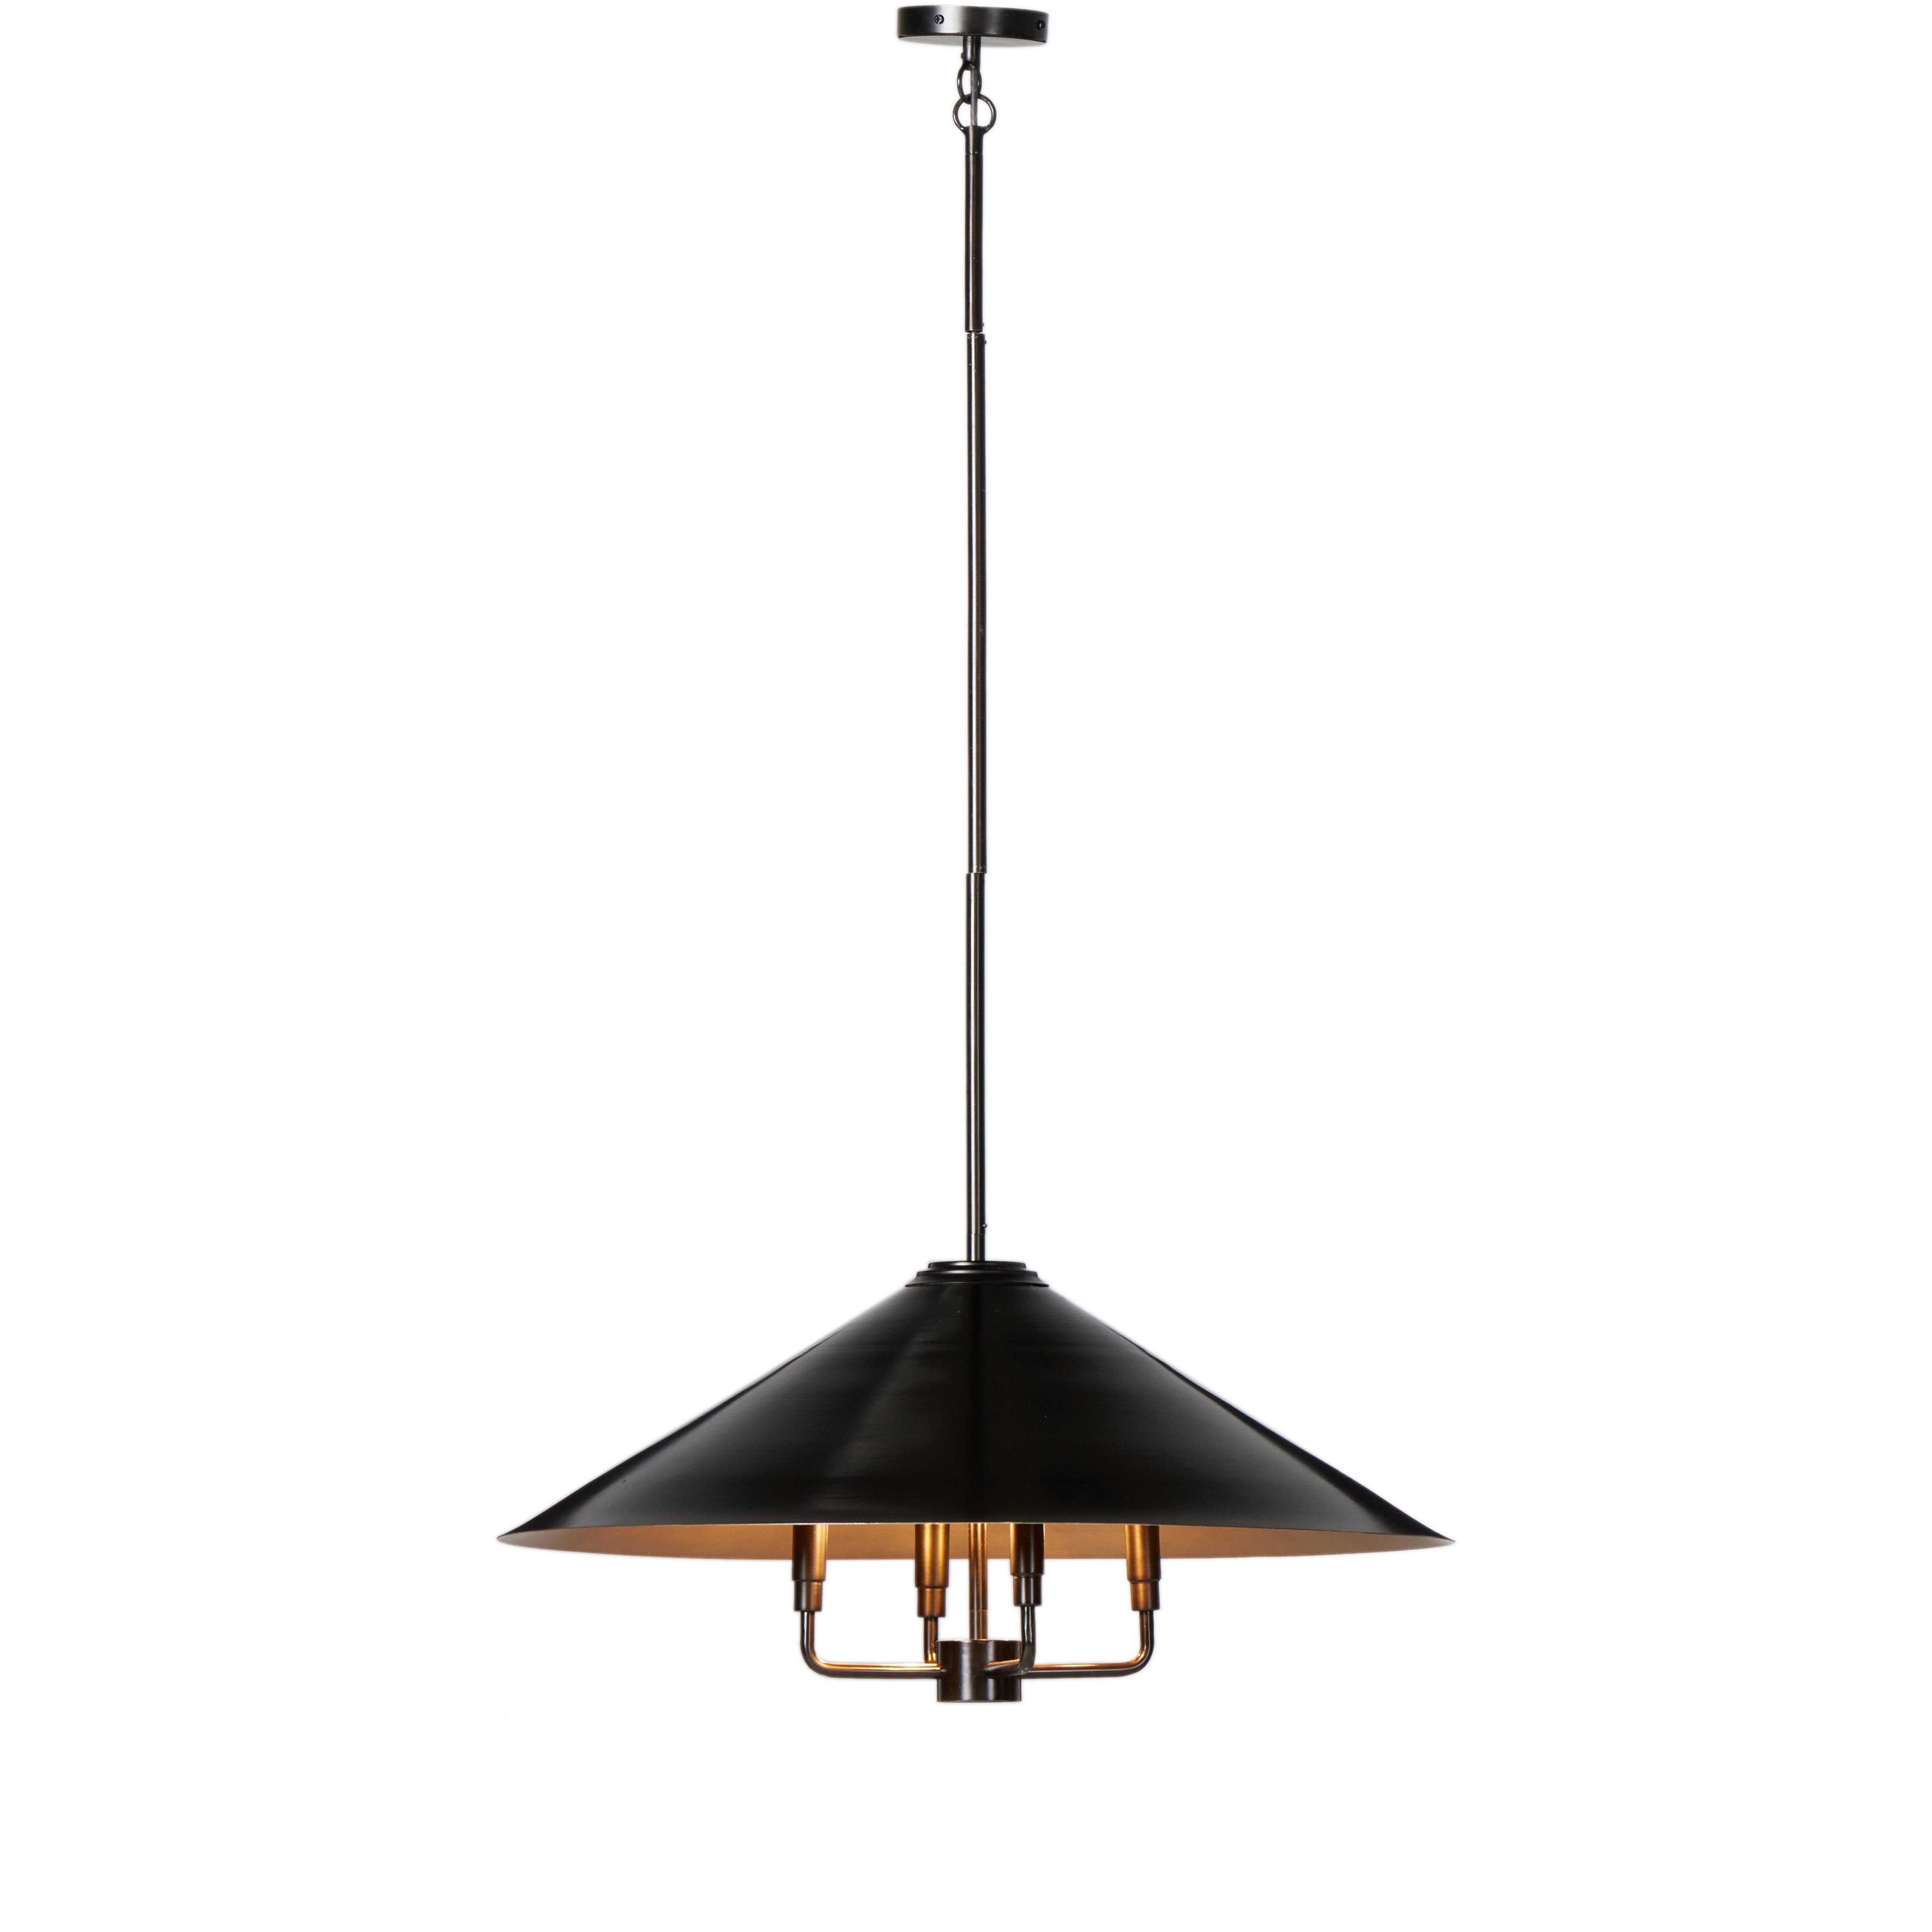 Siriano Chandelier-Oil Rubbed Bronze - Image 2